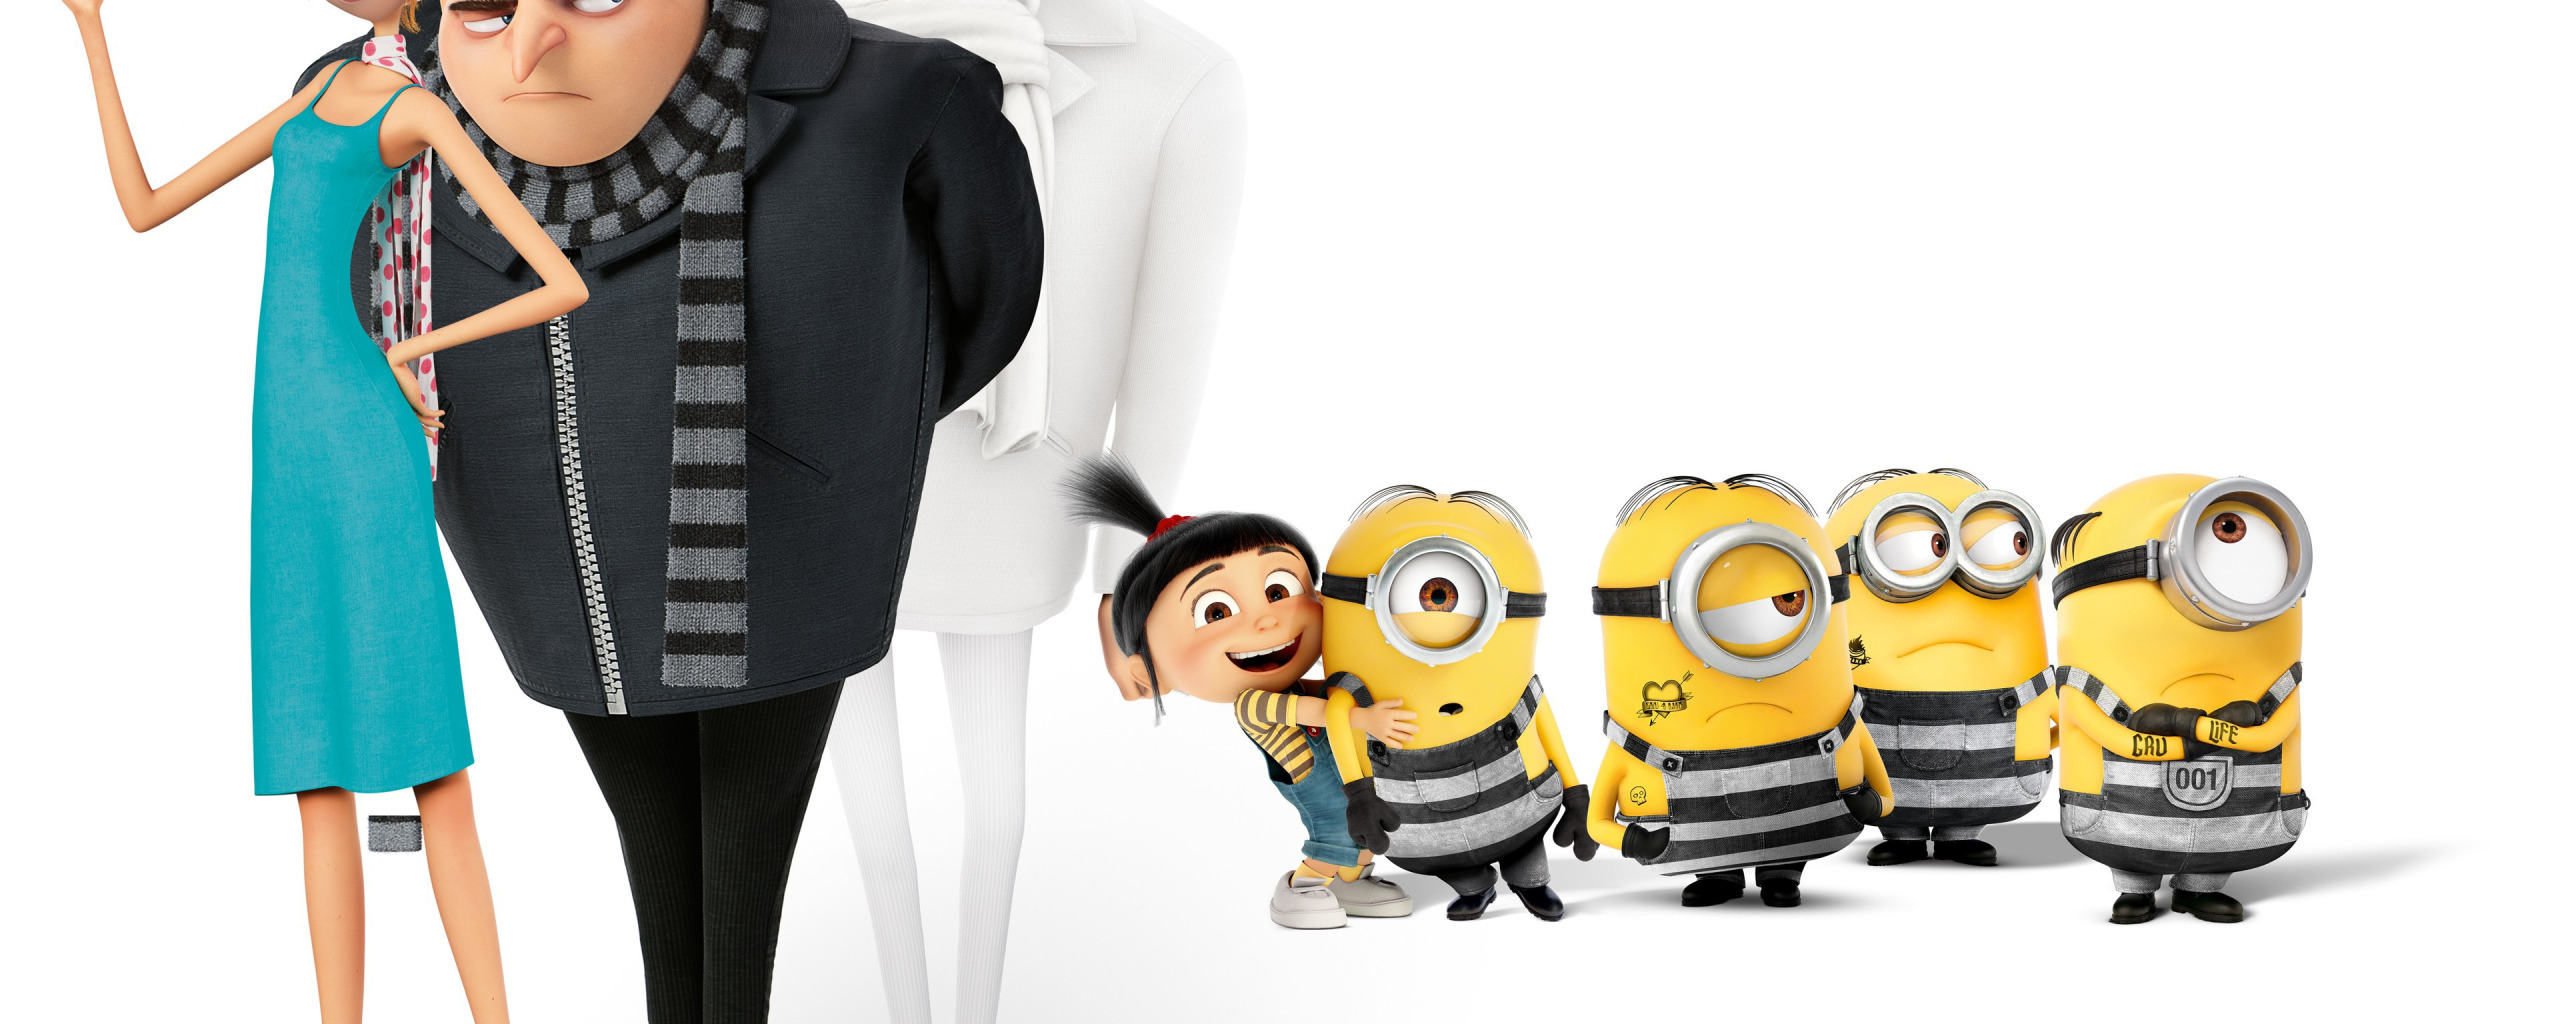 pistol, weapon, woman, man, blonde, brothers, animated film, Despicable Me,...